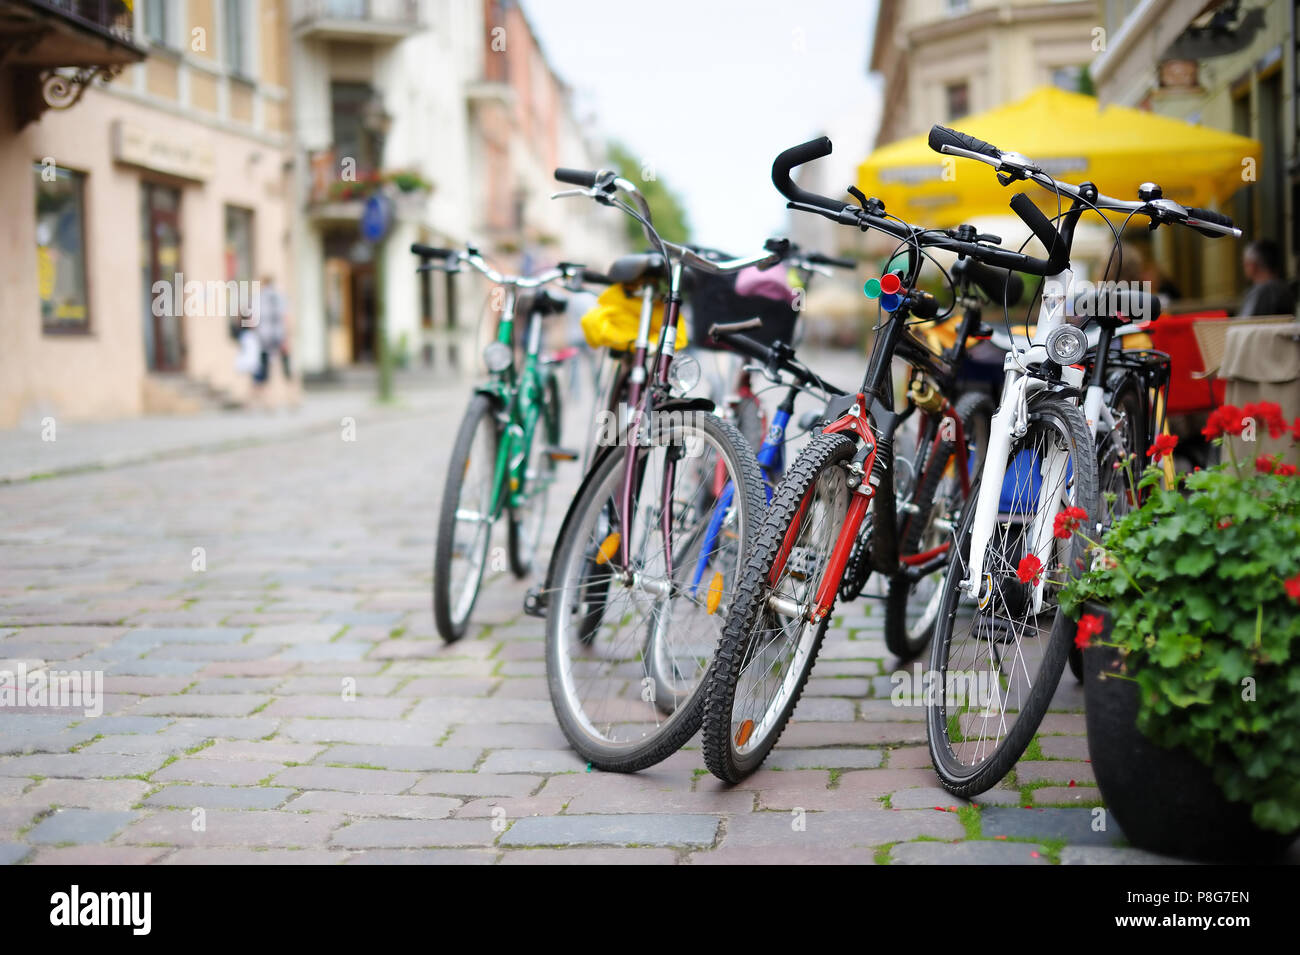 Row of parked colorful bikes on a street Stock Photo